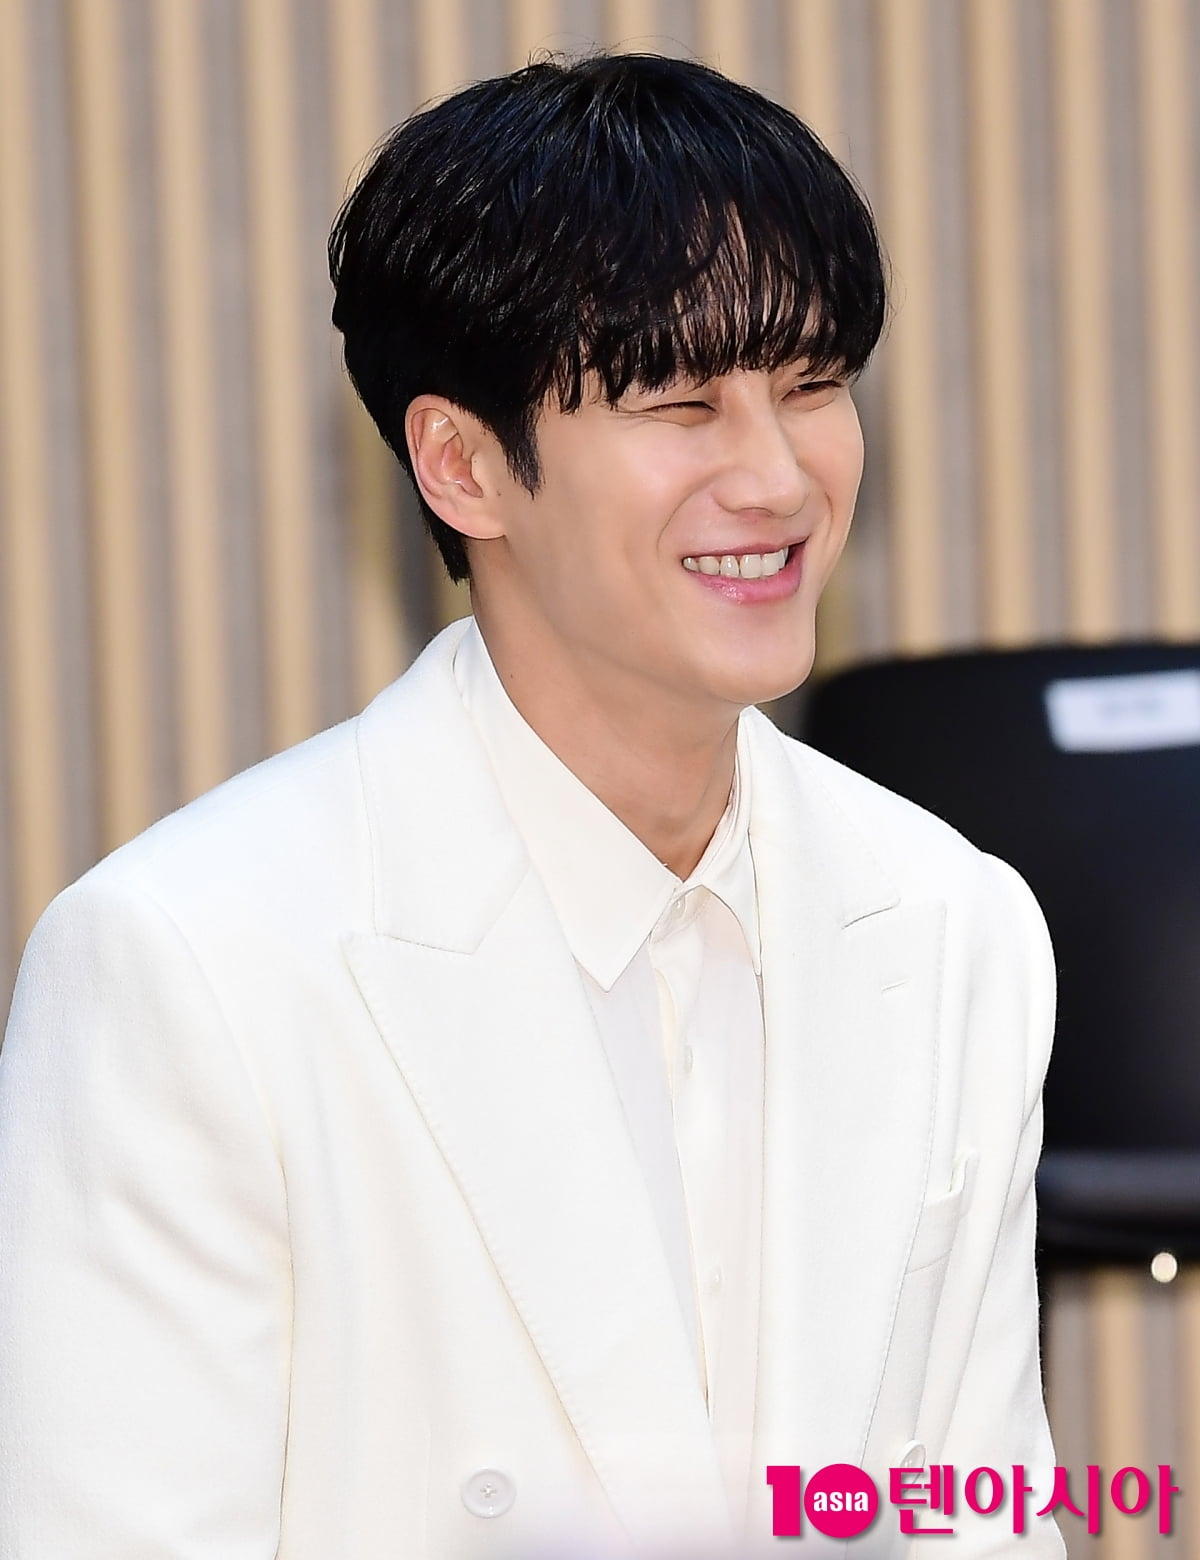 Ahn Bo-hyun, the perfect chaebol detective... falling in love with his smile 